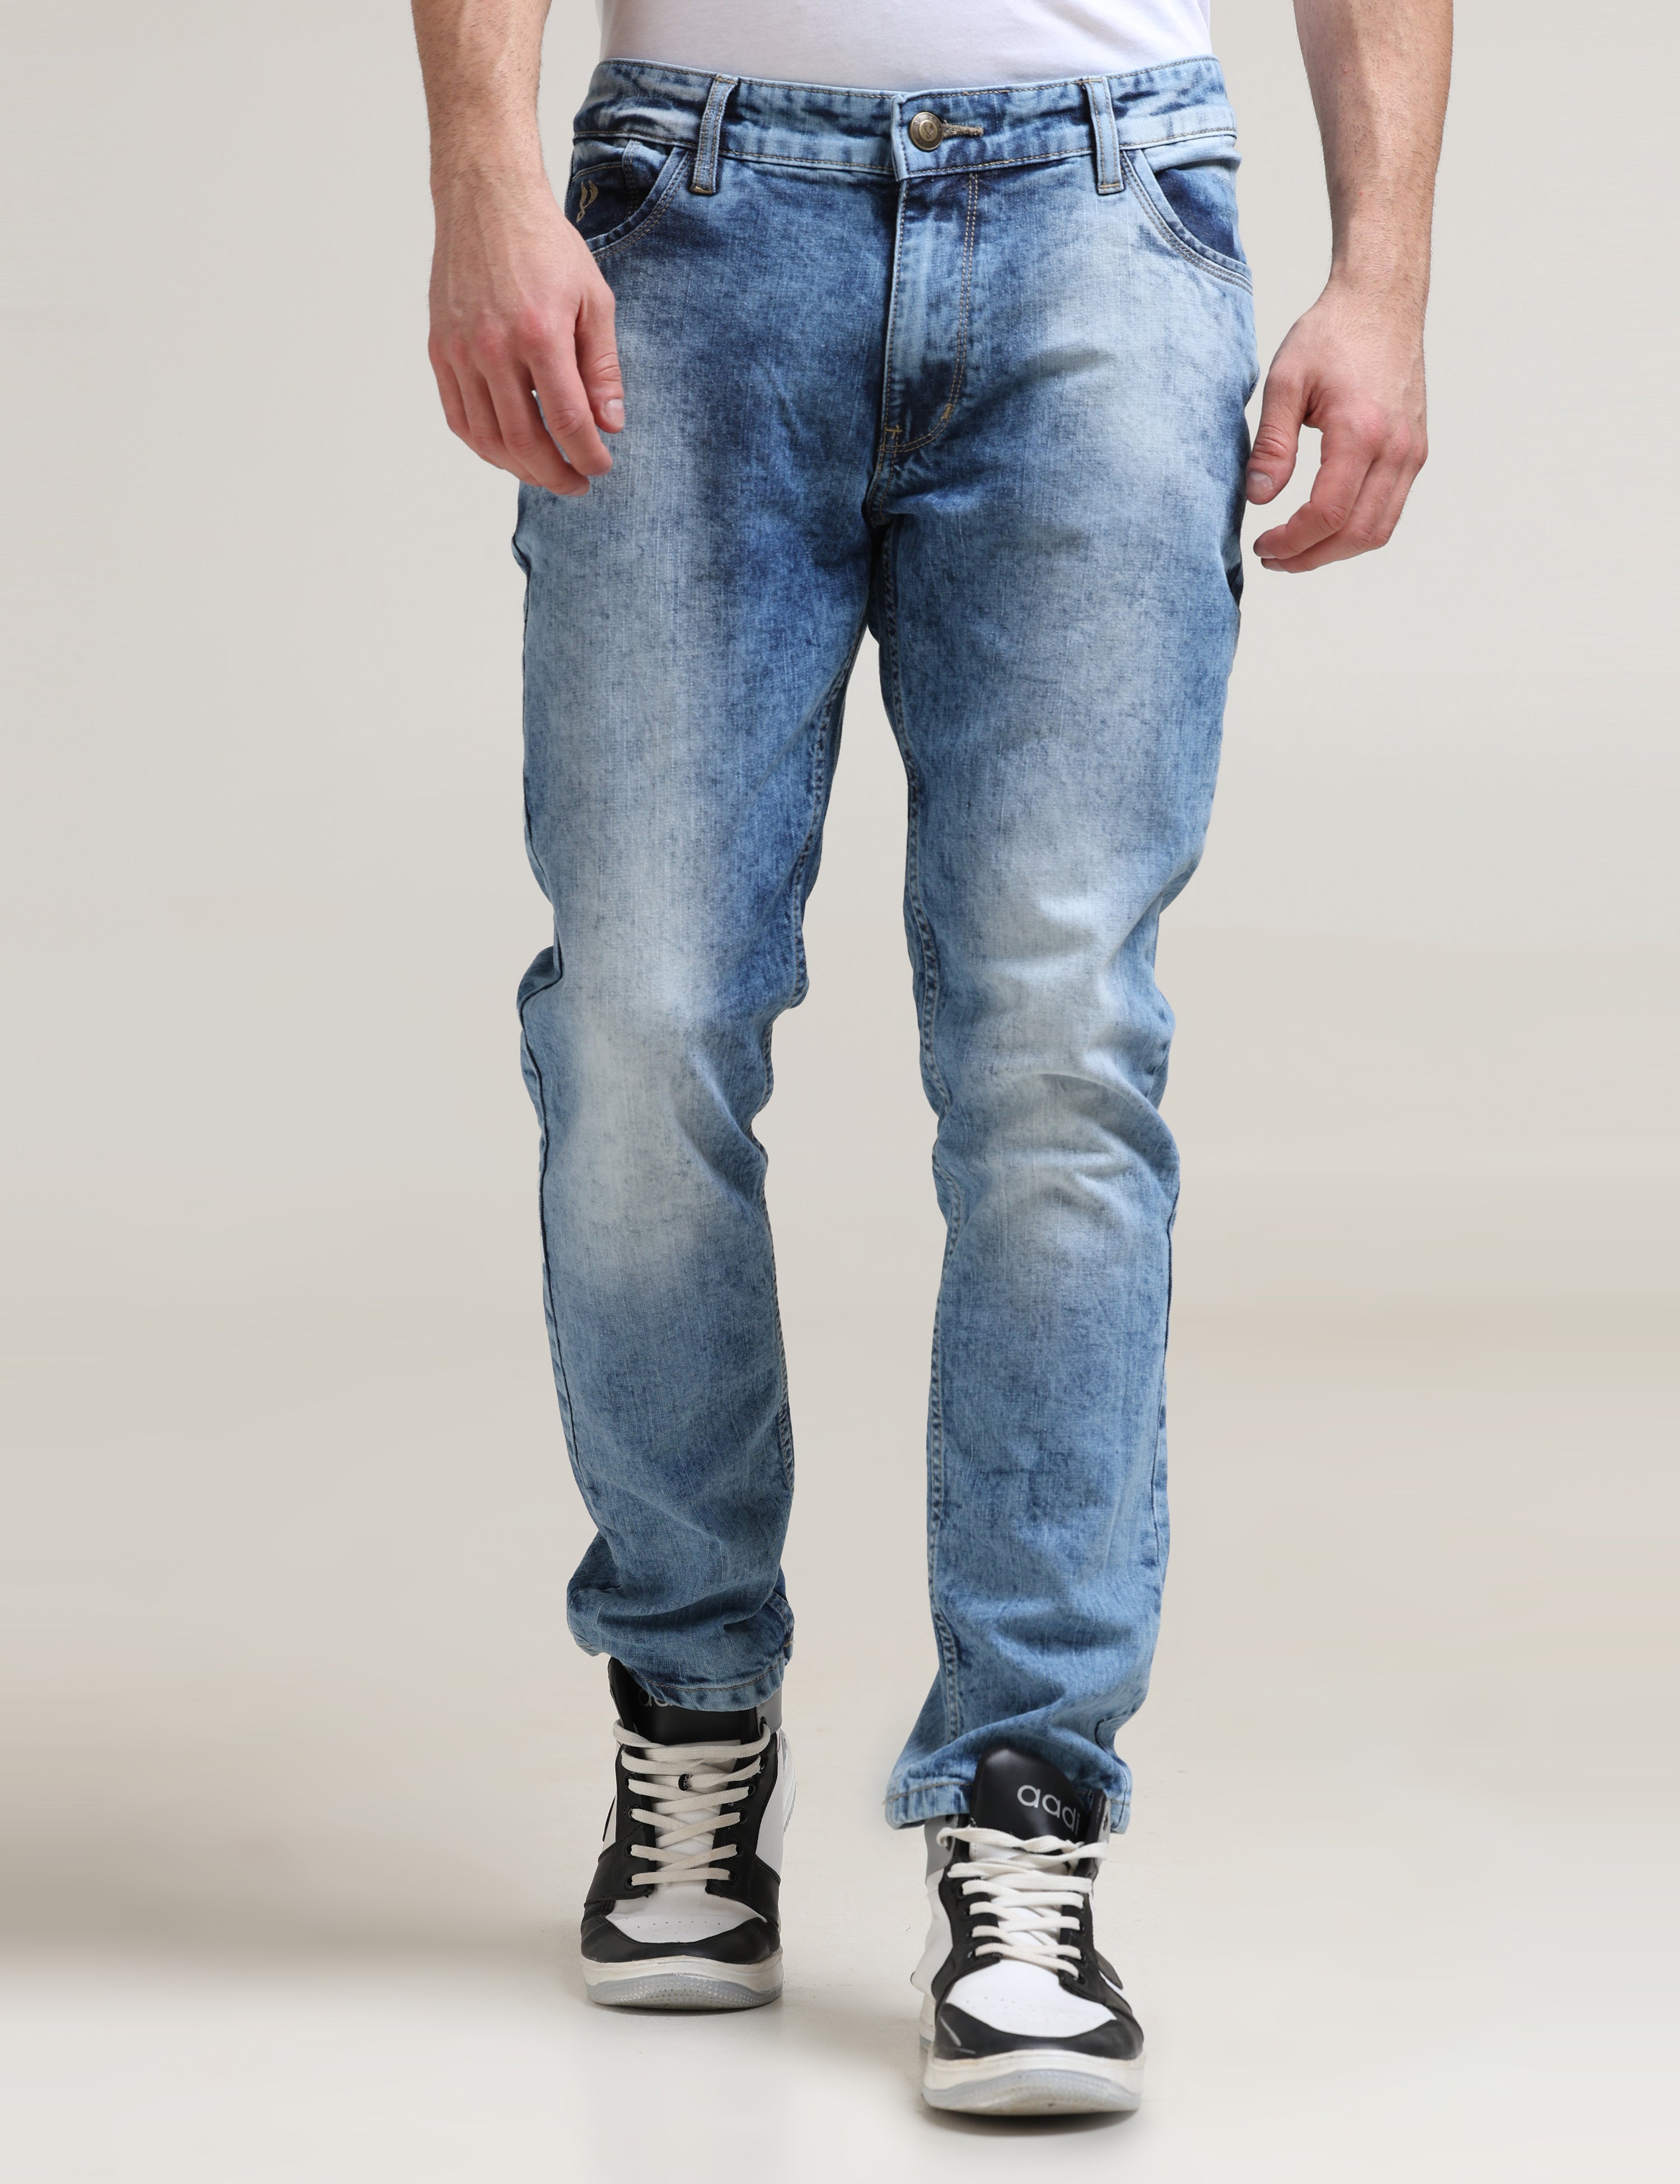 Denim Faded Jeans in Bangalore at best price by Dolly Fashion - Justdial